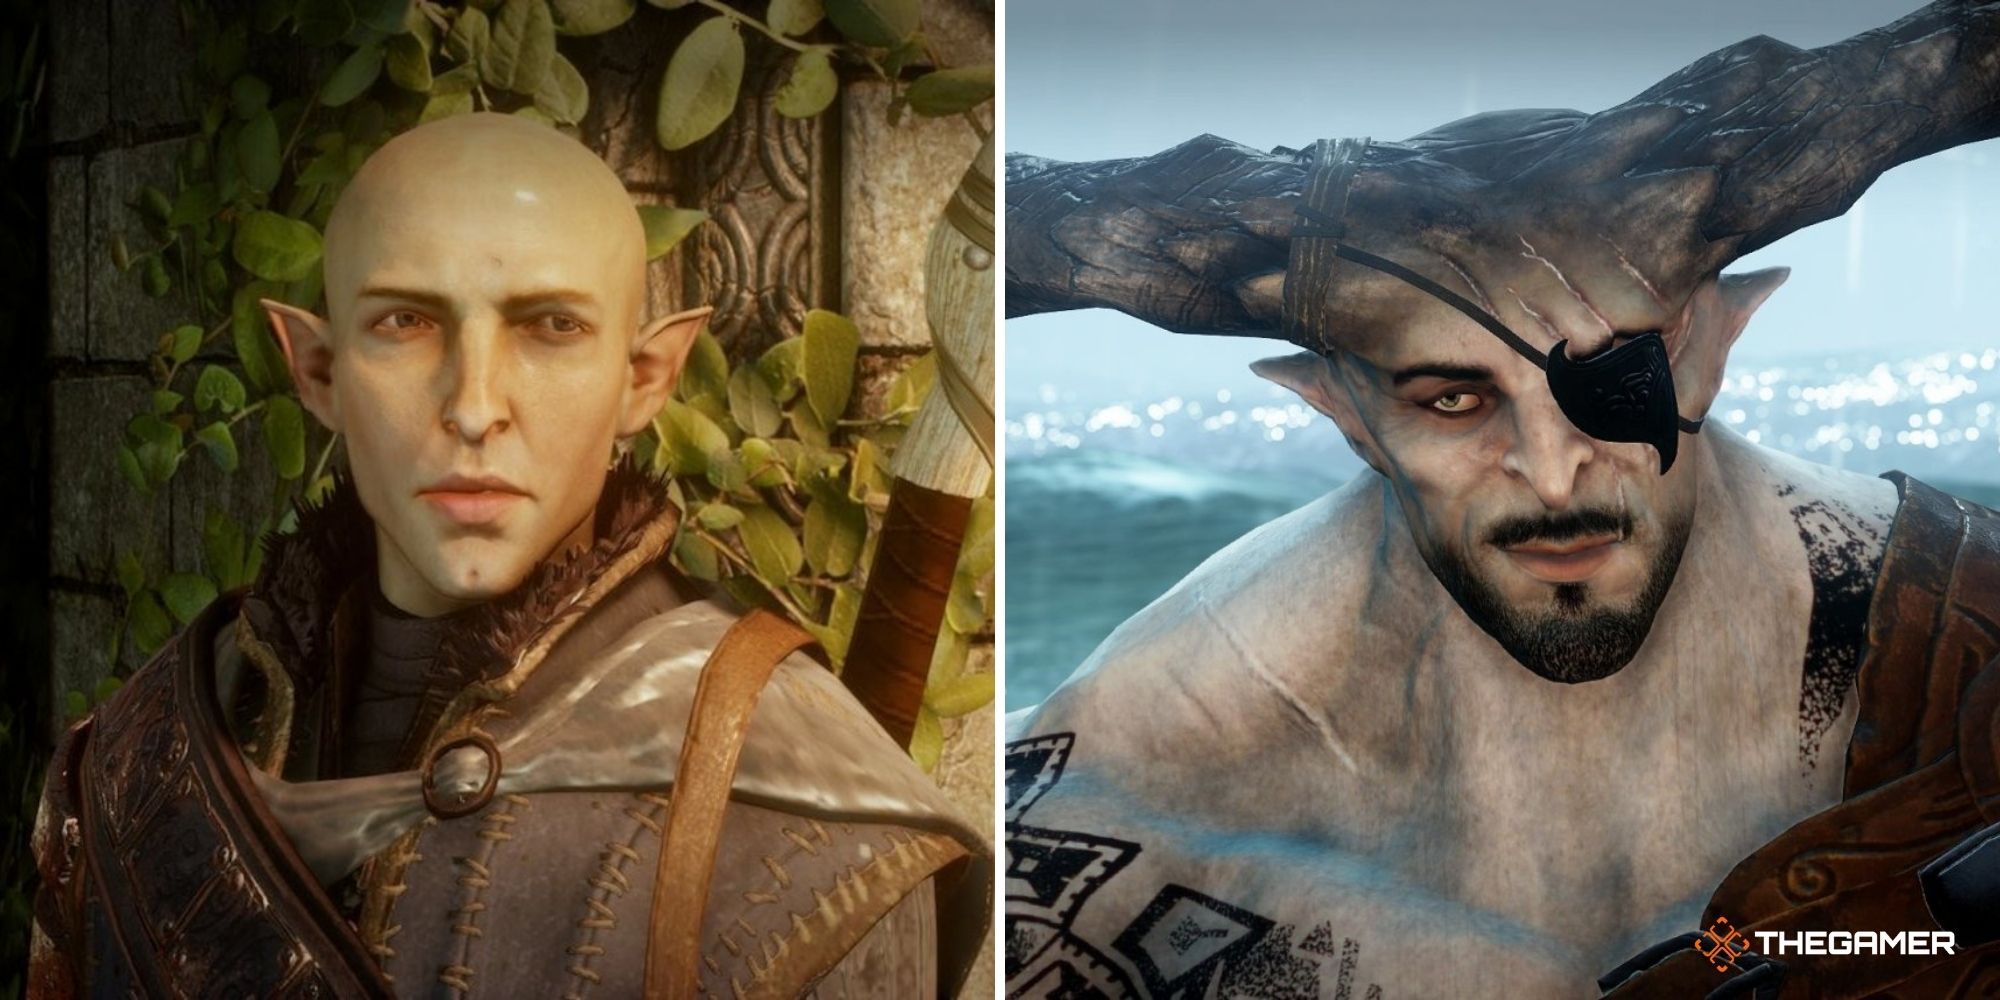 Dragon Age Inquisition - Solas on left, the Iron Bull on right